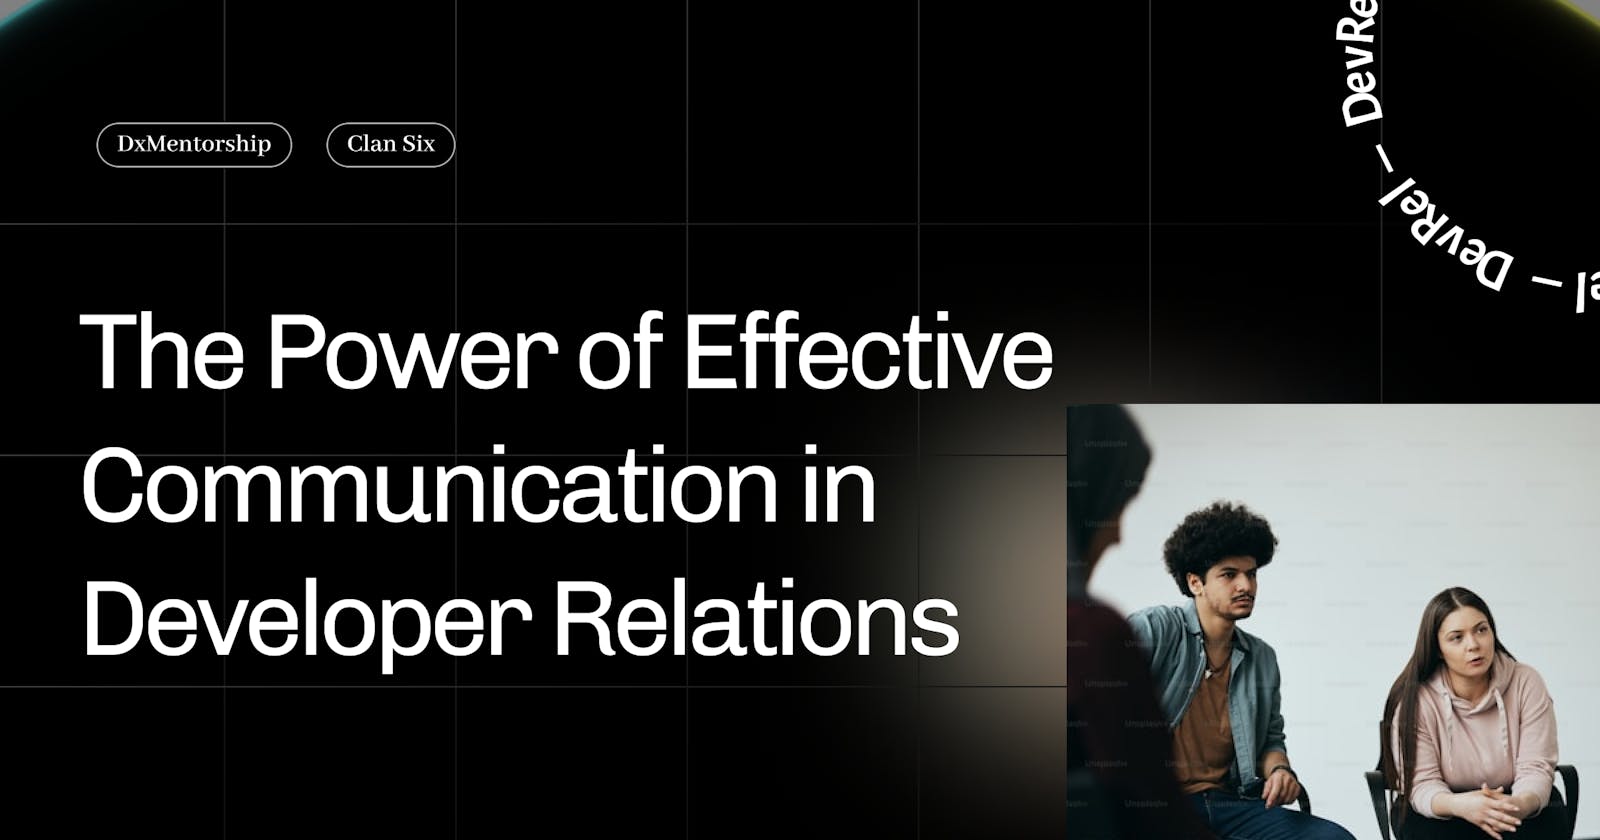 The Power of Effective Communication in Developer Relations